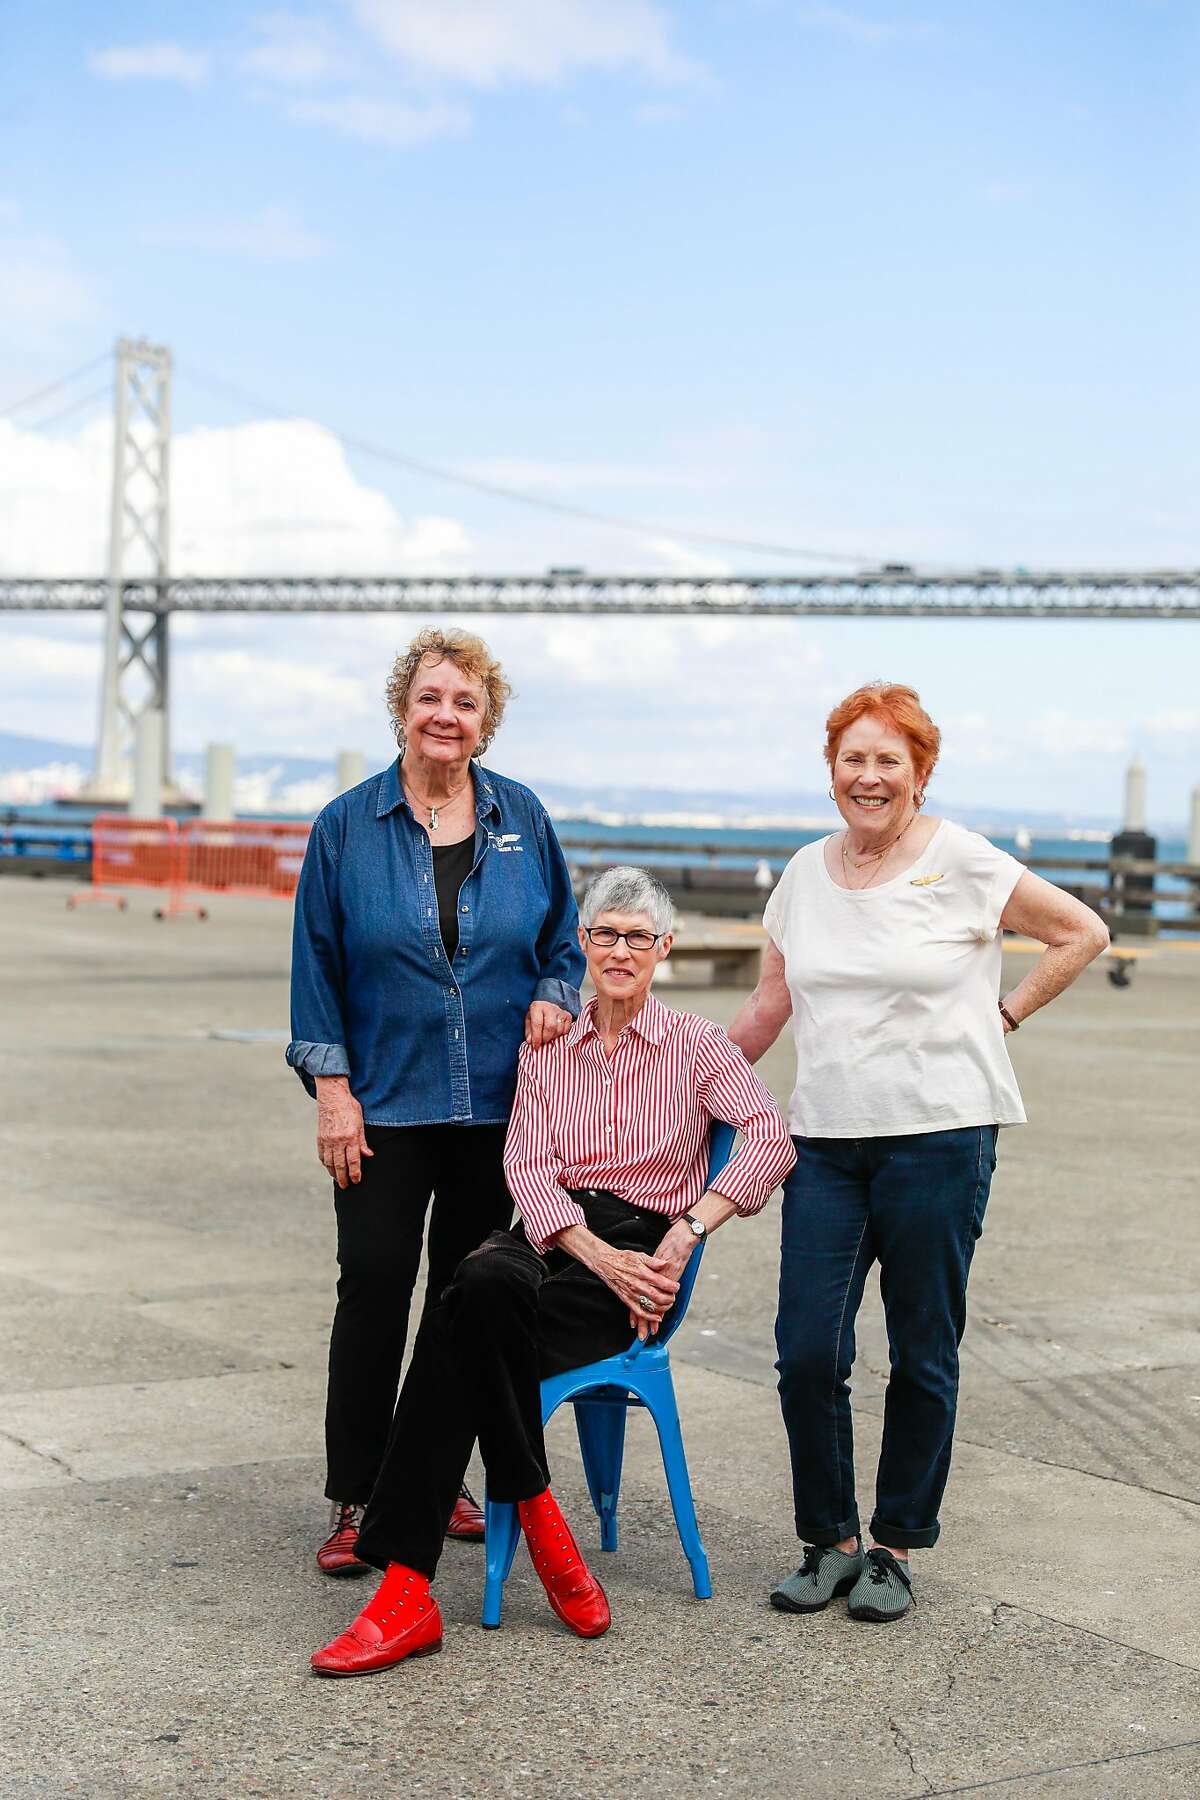 (l-r) Former Flying Tigers flight attendants Marilyn Breen, Sandy Ferguson and Joan Arthur pose for a portrait outside the Ferry Building in San Francisco, California, on Wednesday, Sept. 18, 2019. The former flight attendants were close friends and flew U.S. troops to Vietnam during the Vietnam War.